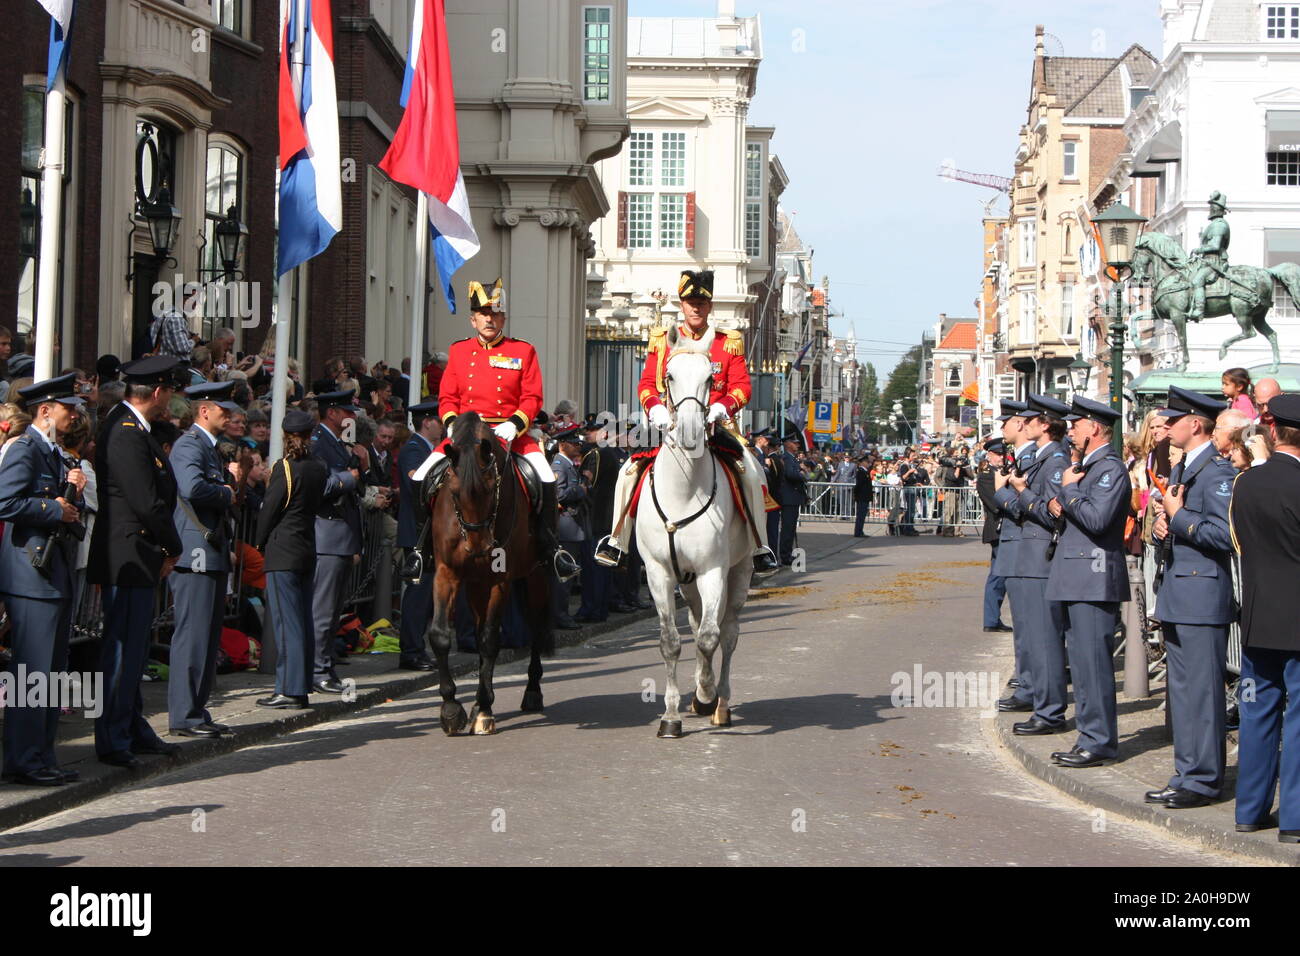 Prinsjesdag Royal Parade started from Noordeinde Palace to The Ridderzaal in Den Haag. Stock Photo